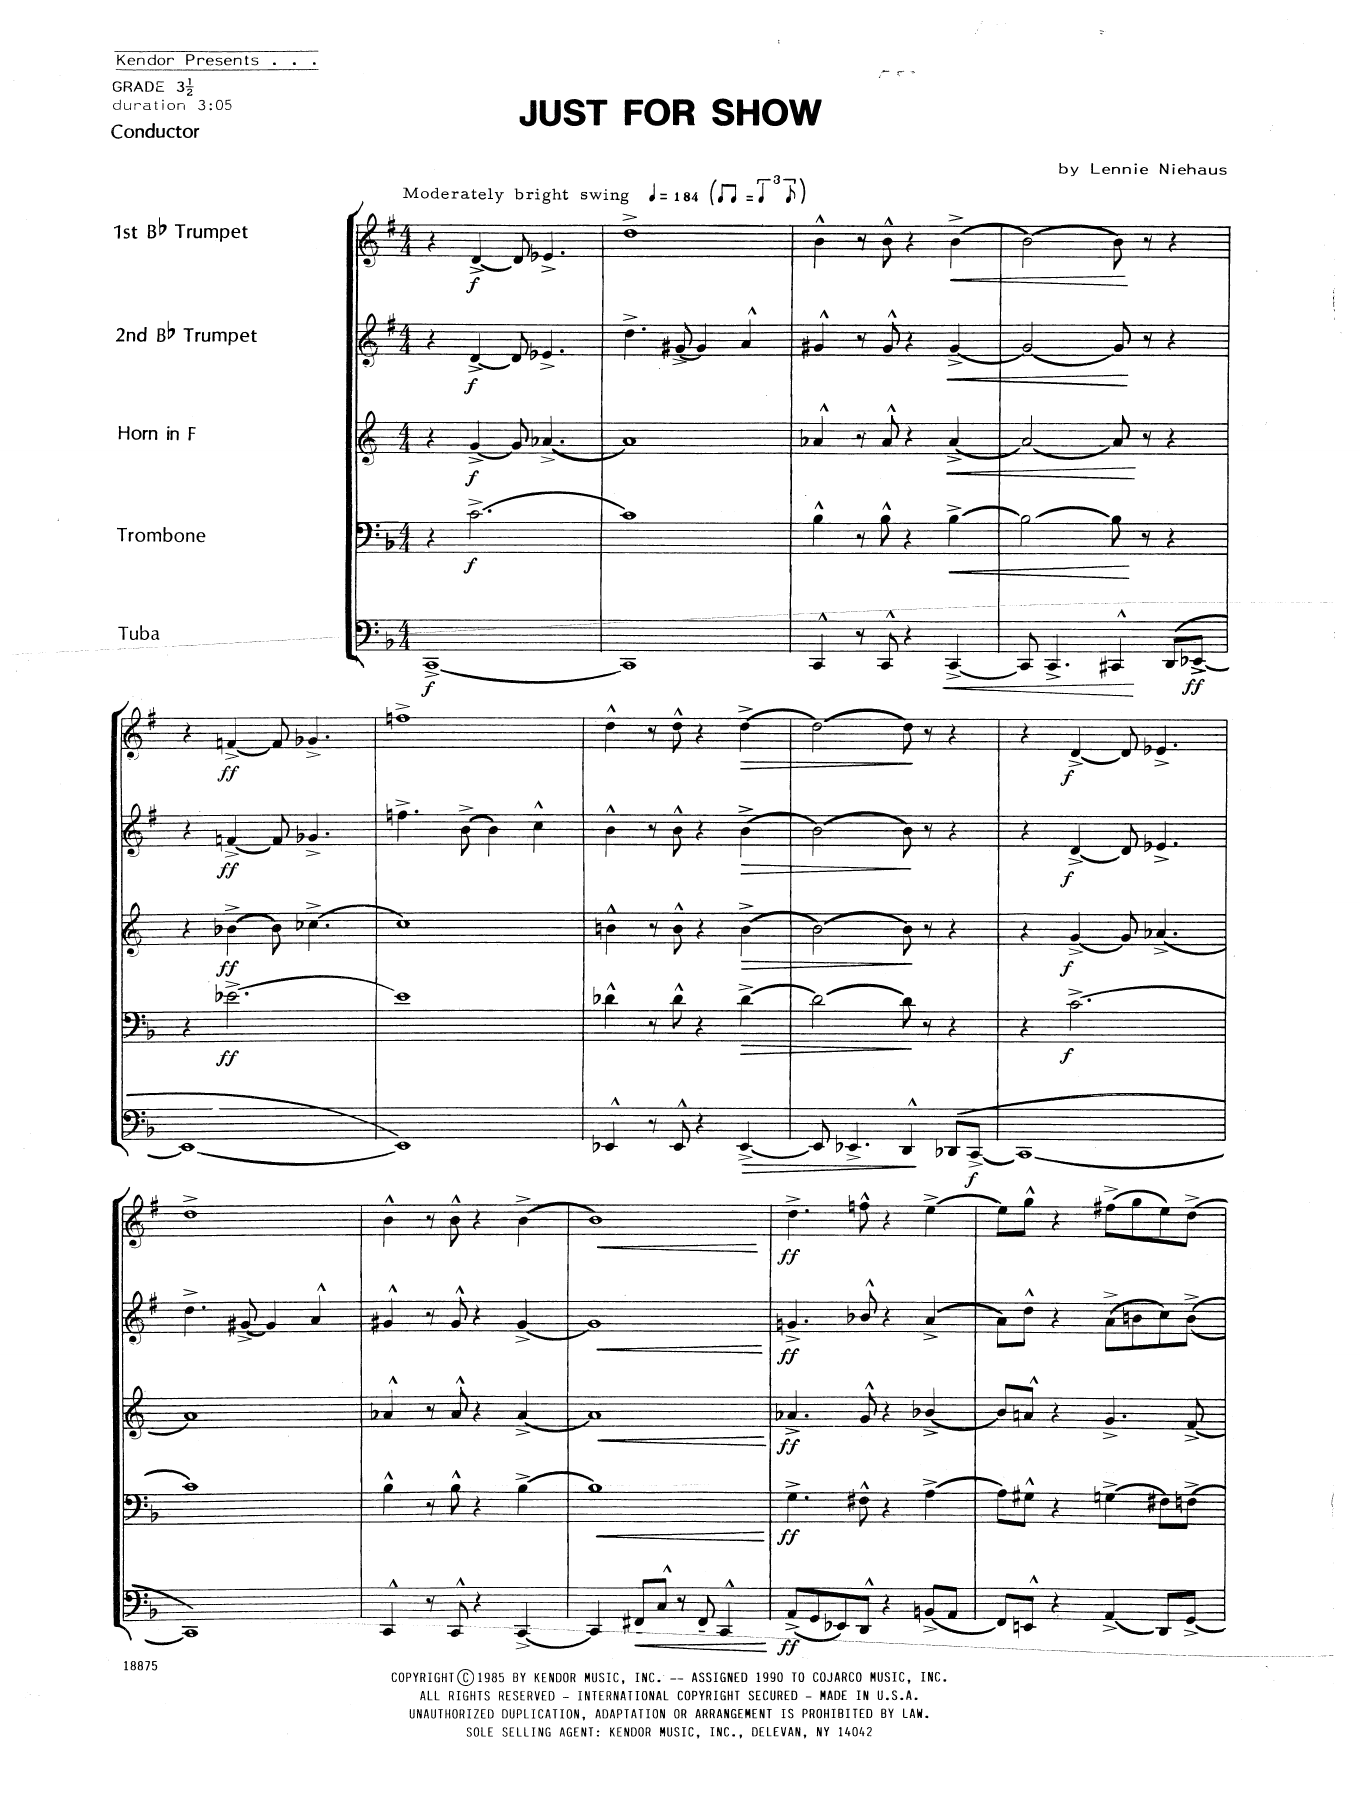 Download Lennie Niehaus Just For Show - Full Score Sheet Music